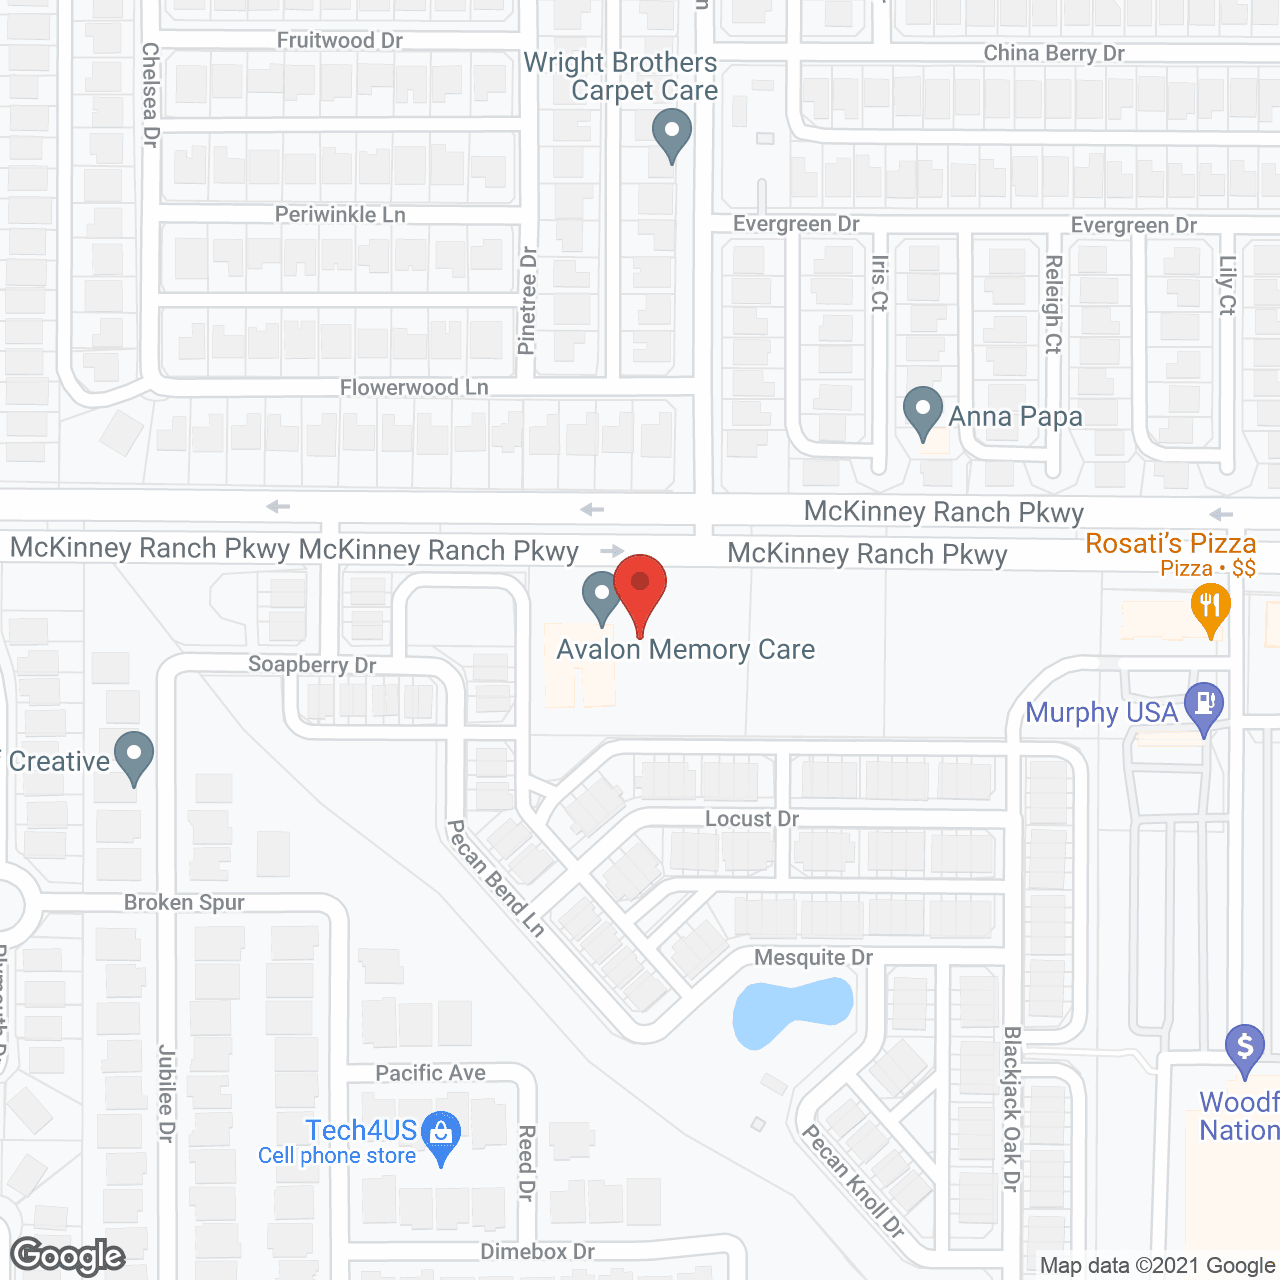 Avalon Memory Care - McKinney Ranch Parkway in google map